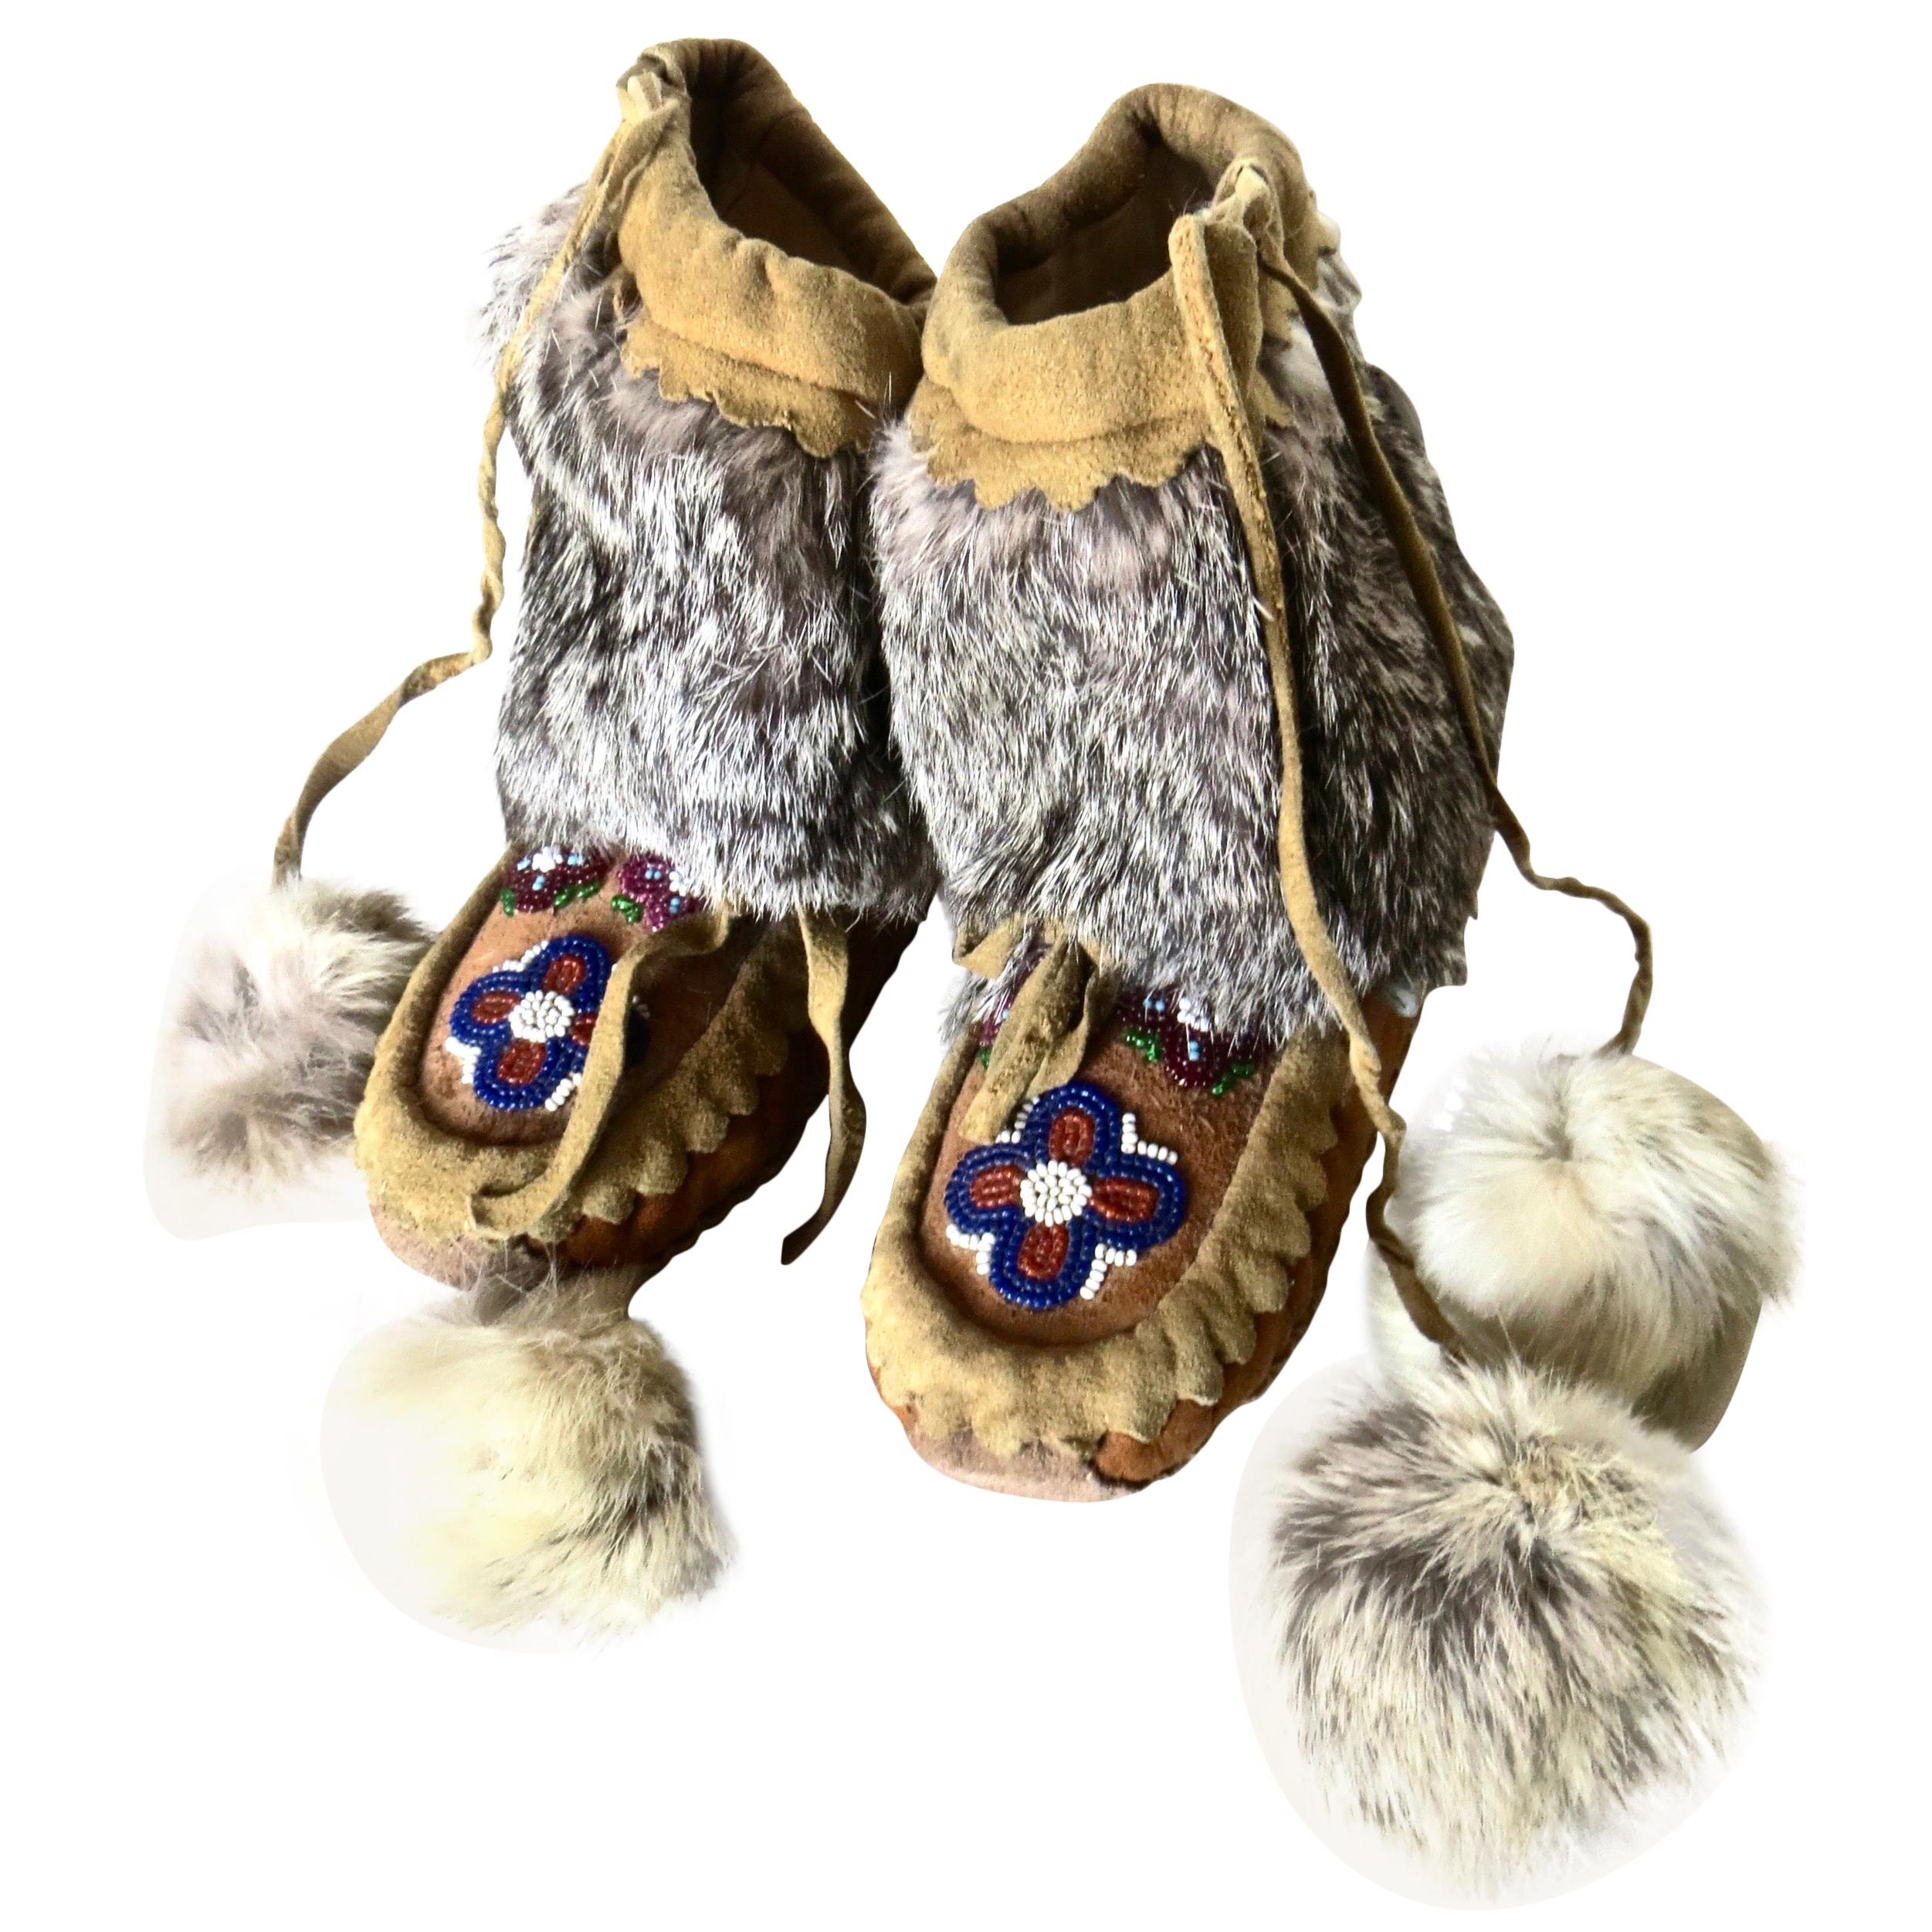 Pacific Northwest Native American Indian Child's High Top Moccasins, Circa 1930